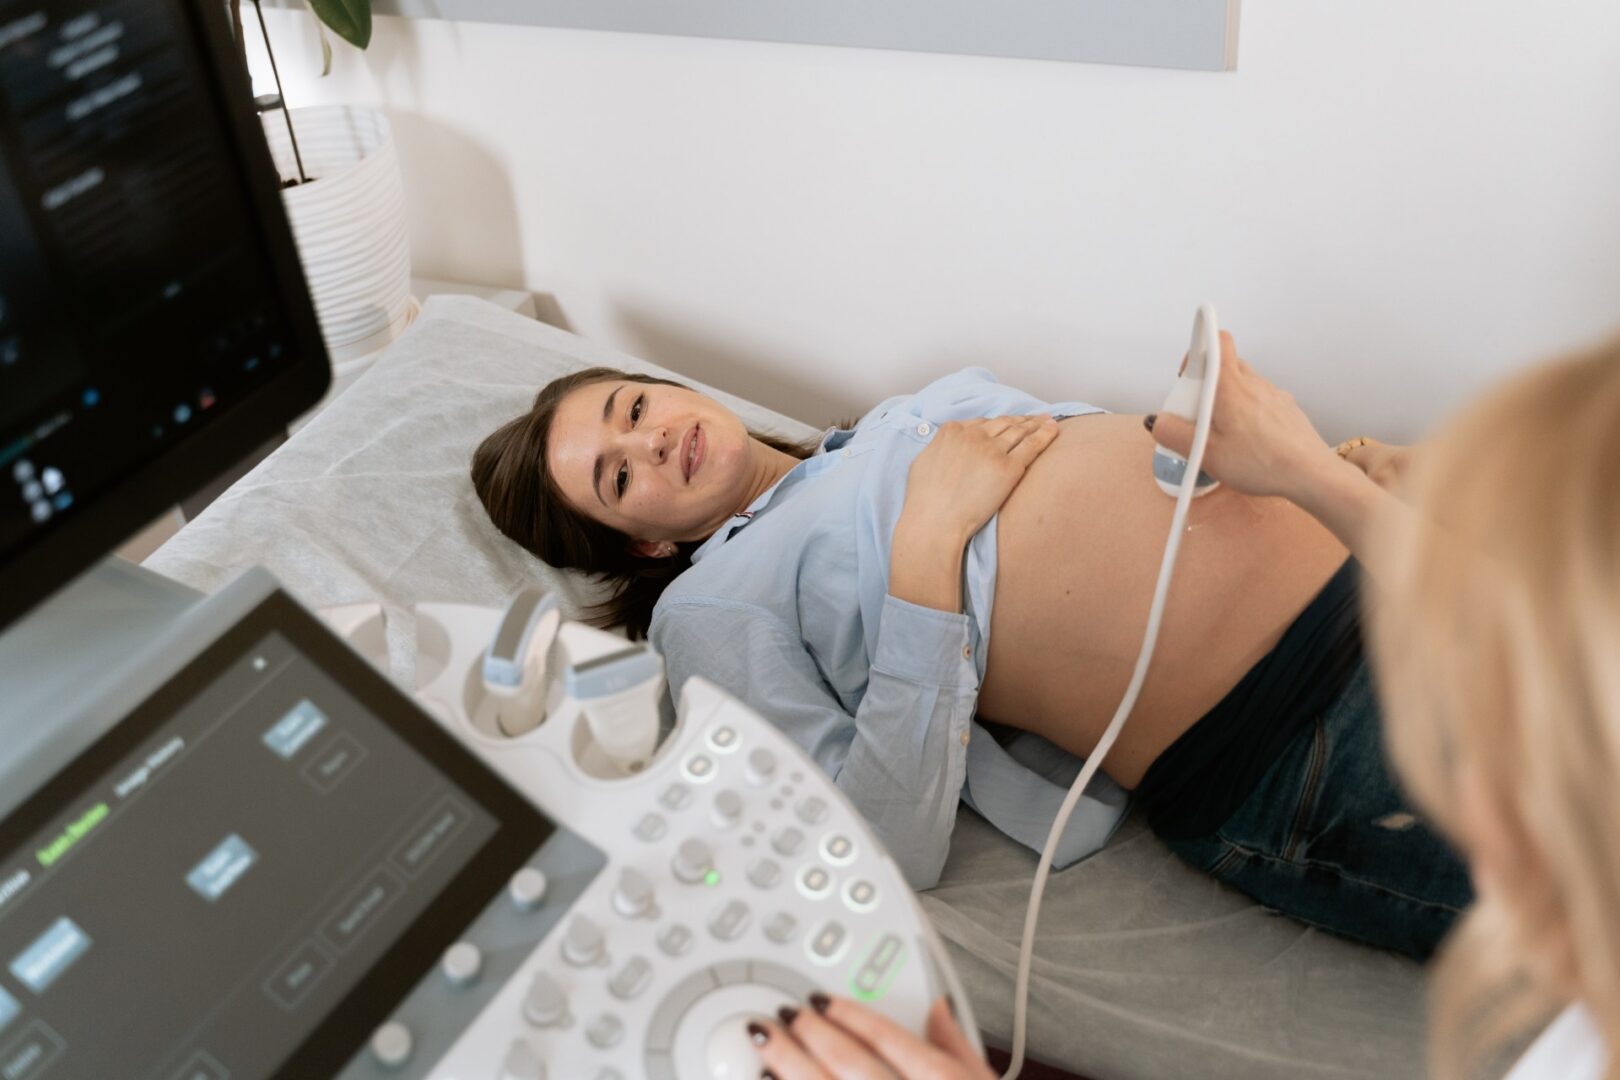 Gynecologist Doing An Ultrasound On A Pregnant Woman